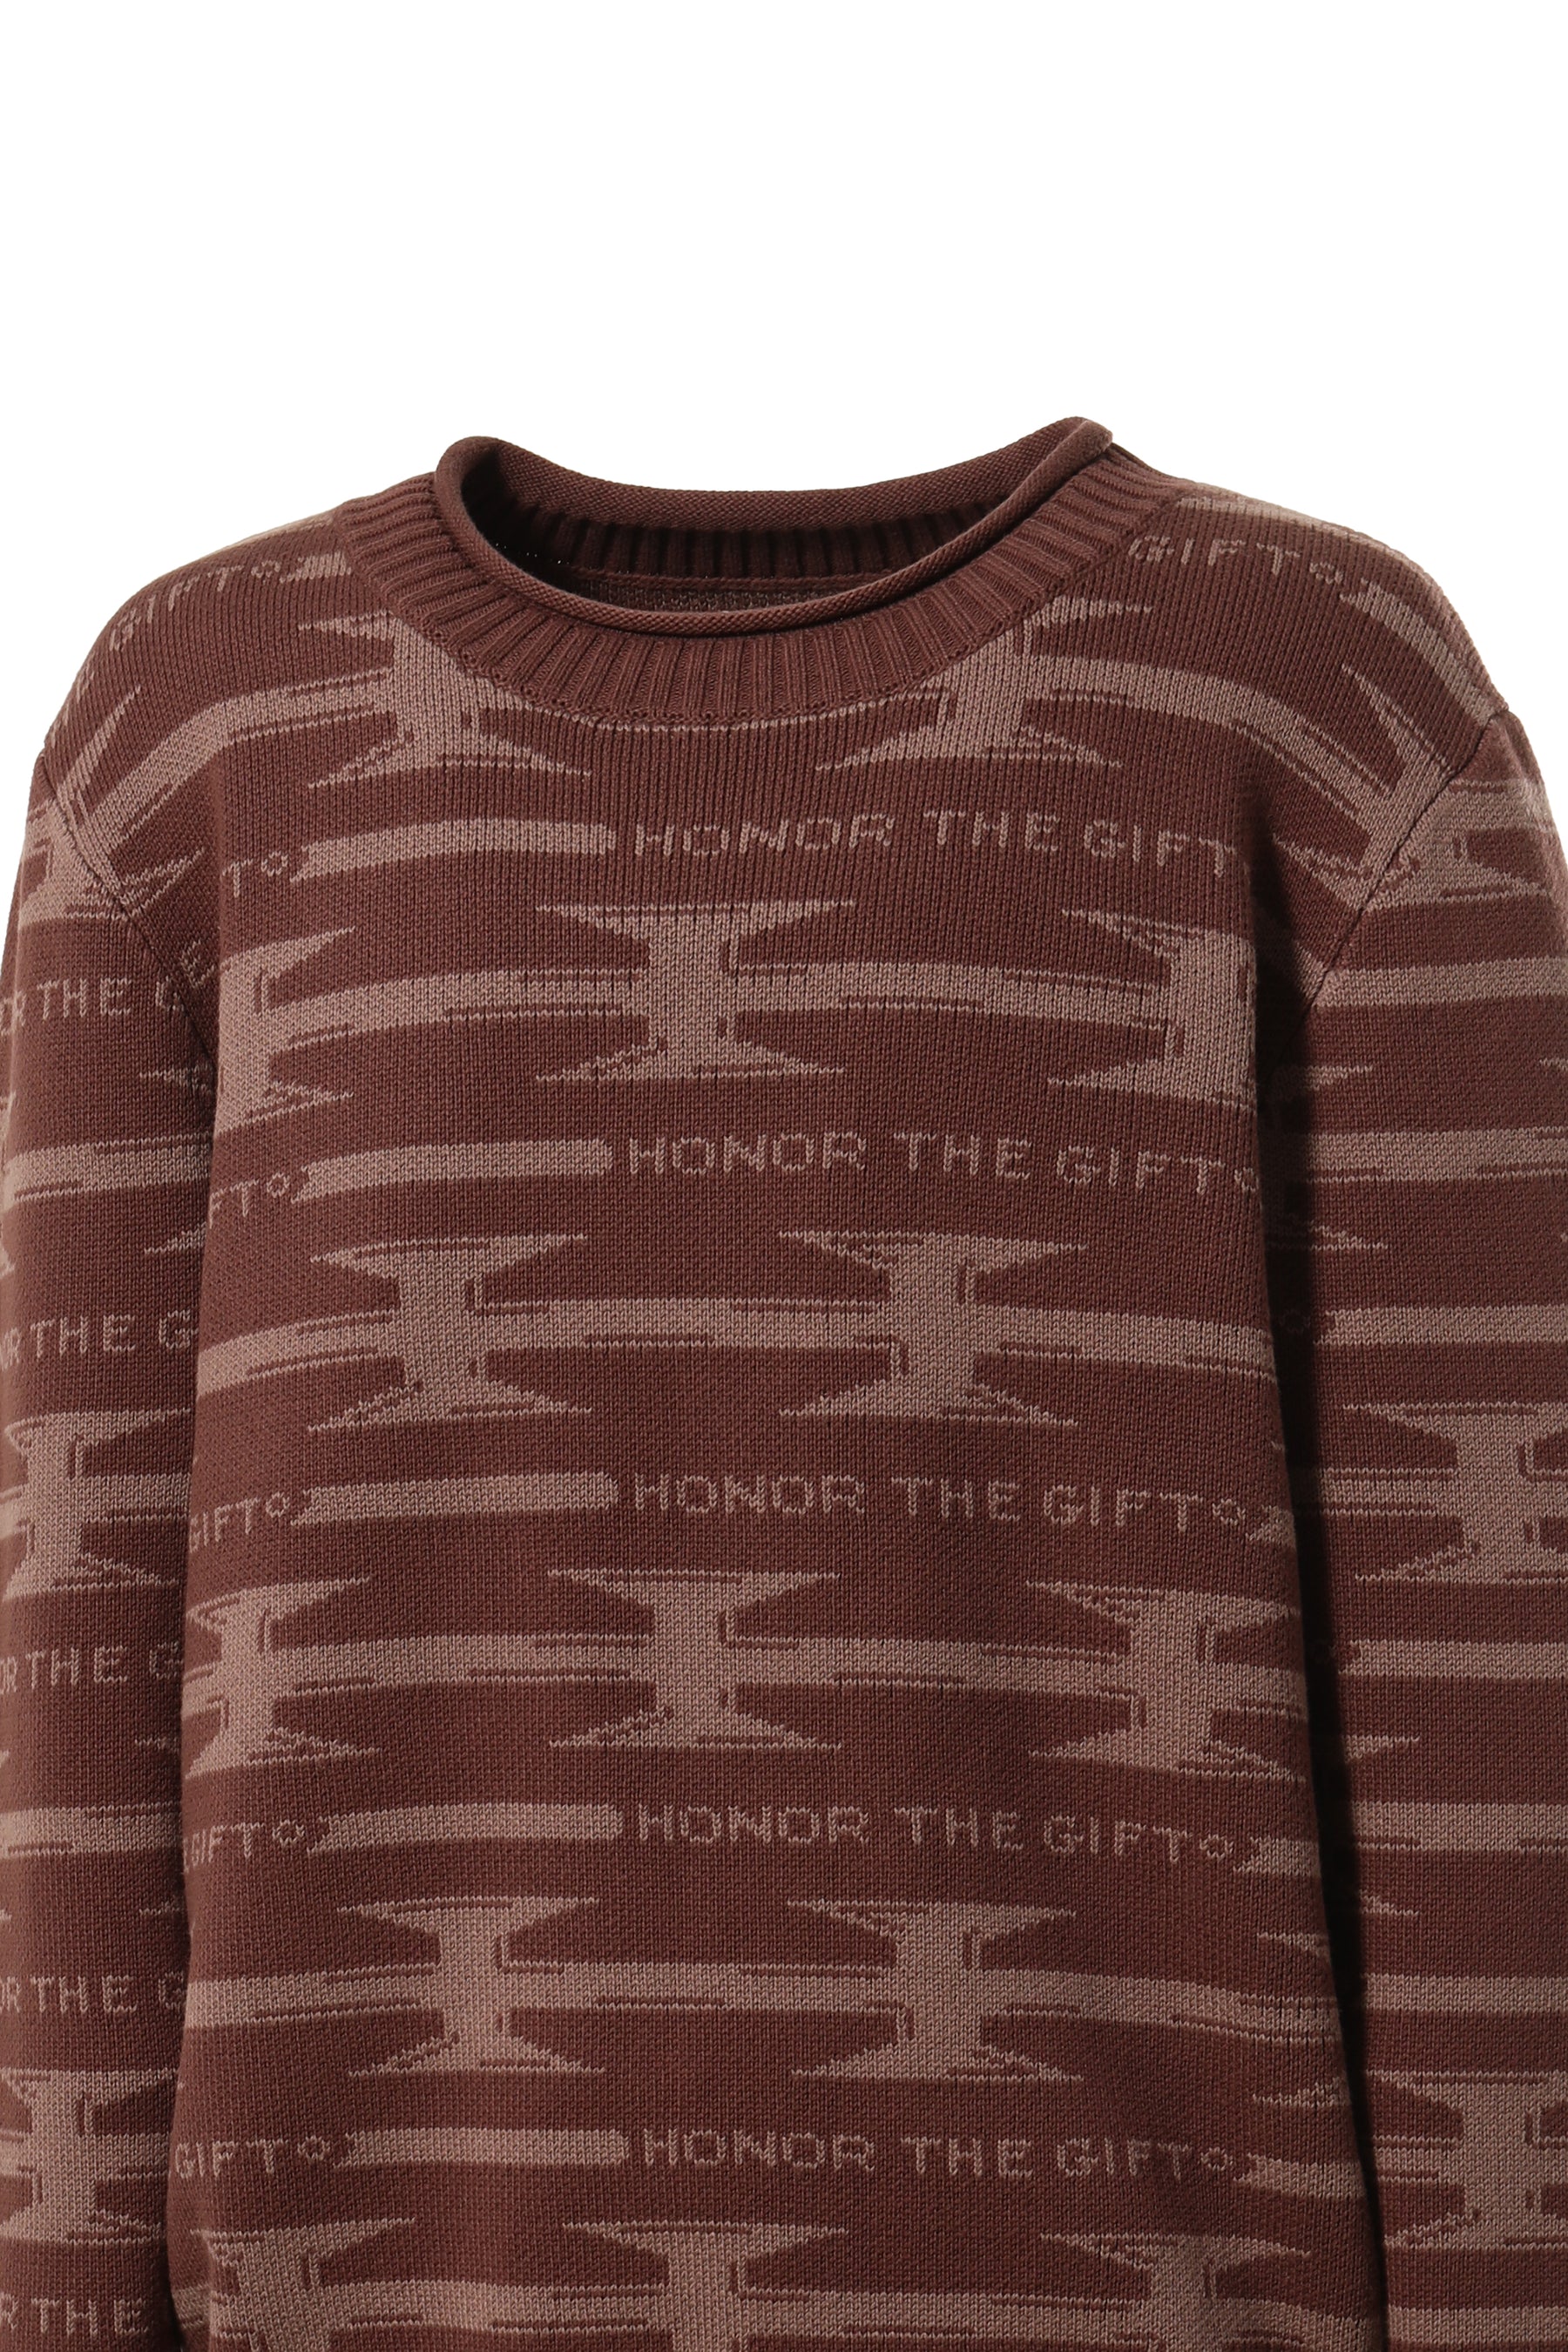 HONOR THE GIFT H WIRE KNIT SWEATER / BRWN